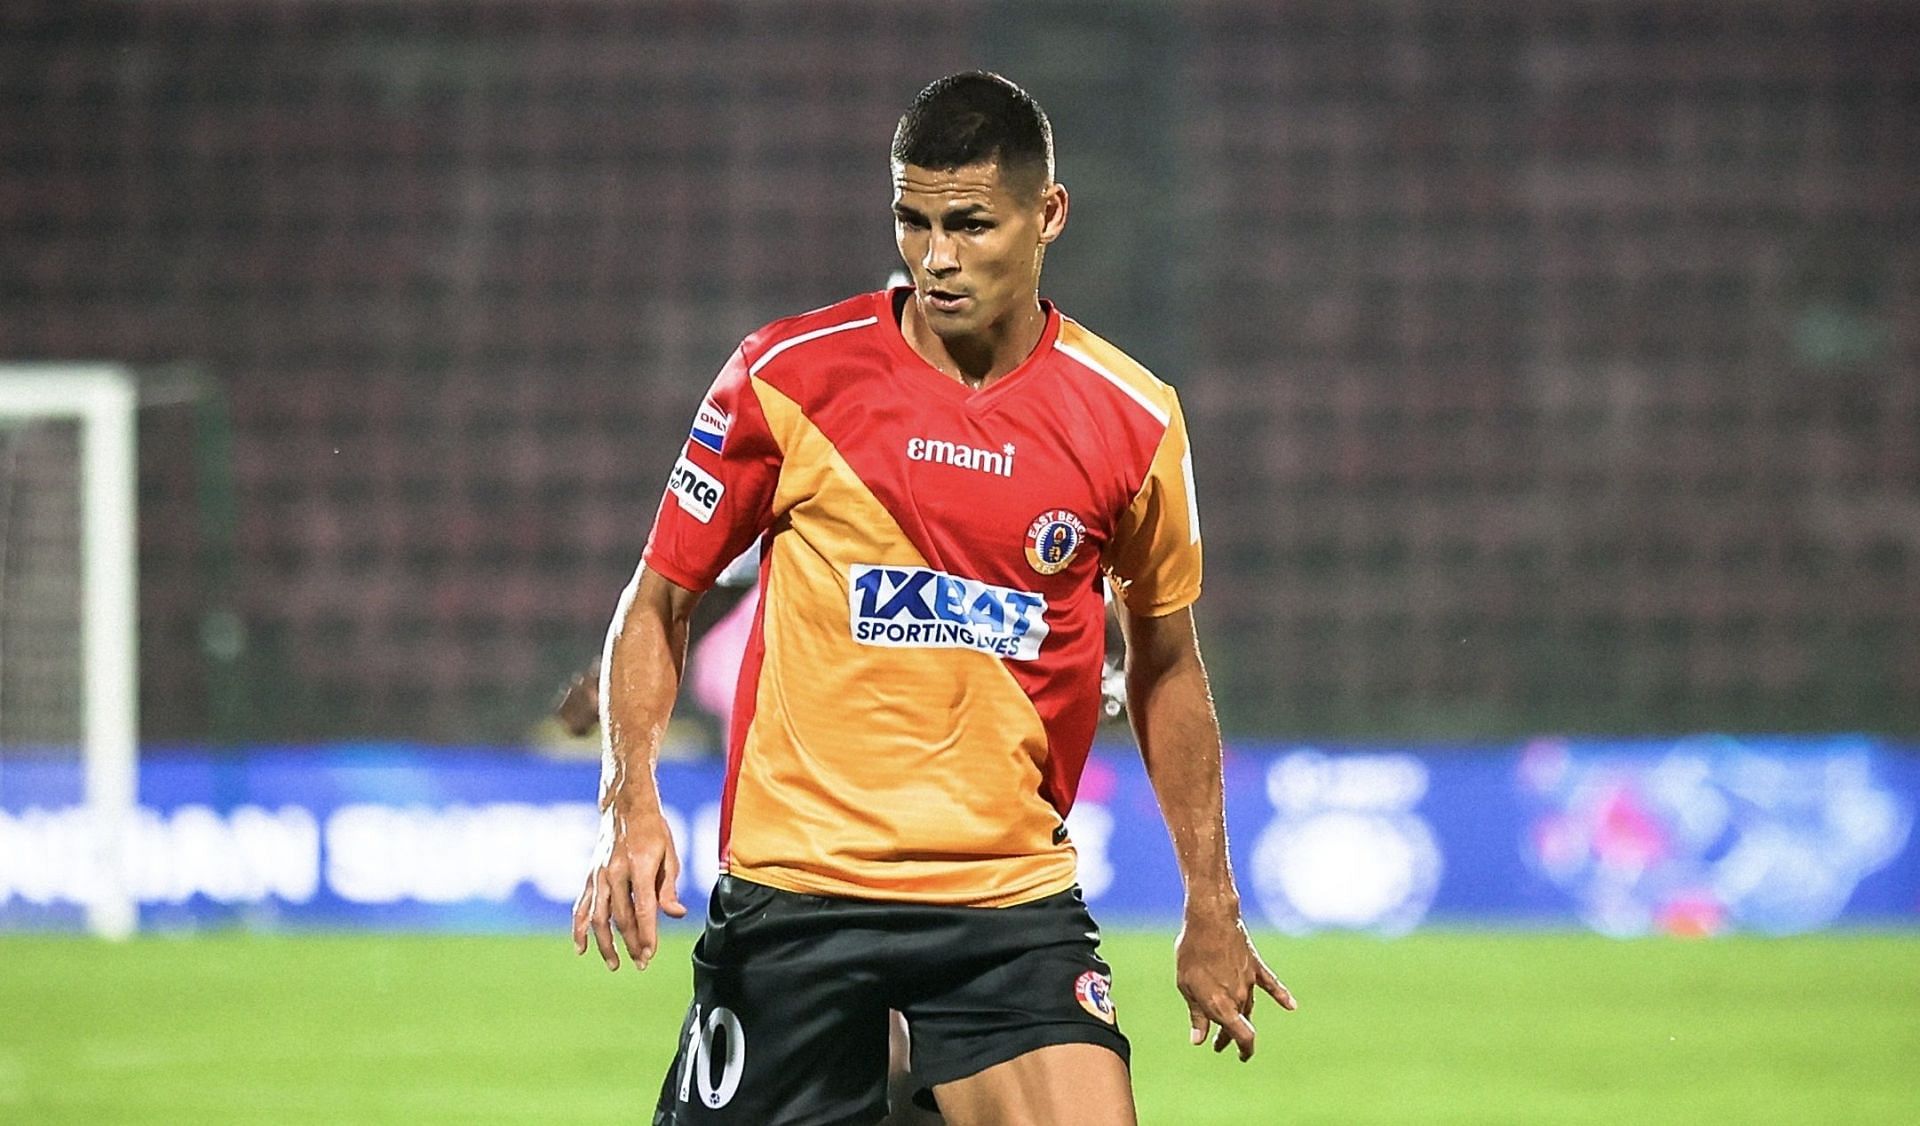 Cleiton Silva was East Bengal